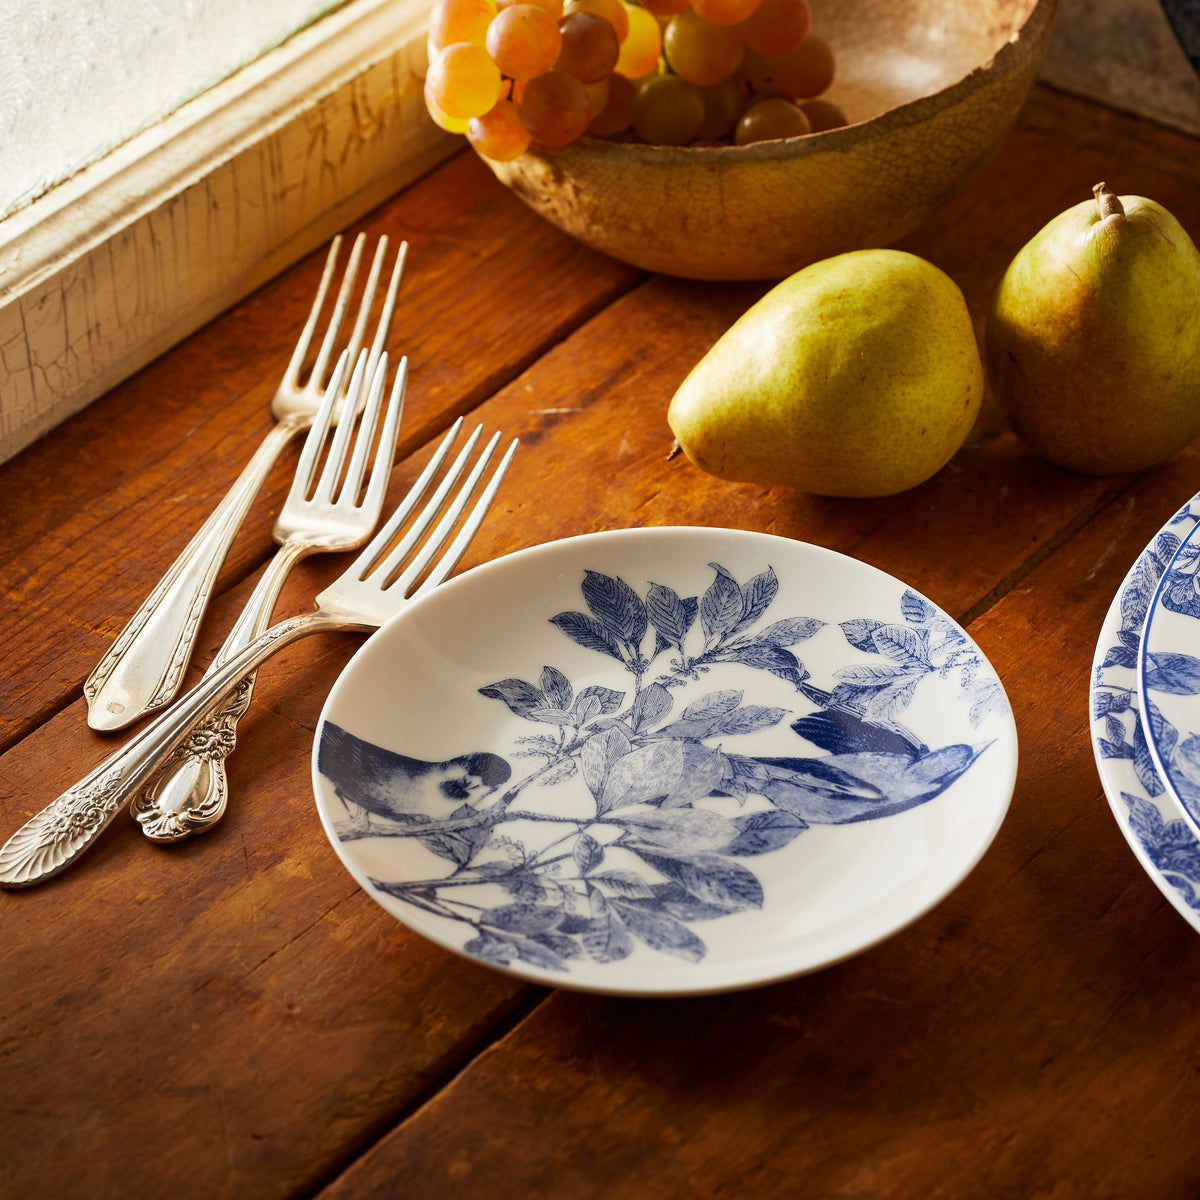 A white plate with botanical details and blue floral patterns, two pears, a bowl of grapes, and silver forks are arranged on a wooden table near a window. The Caskata Artisanal Home Arbor Blue Birds Small Plates enhance the rustic charm of the setting.